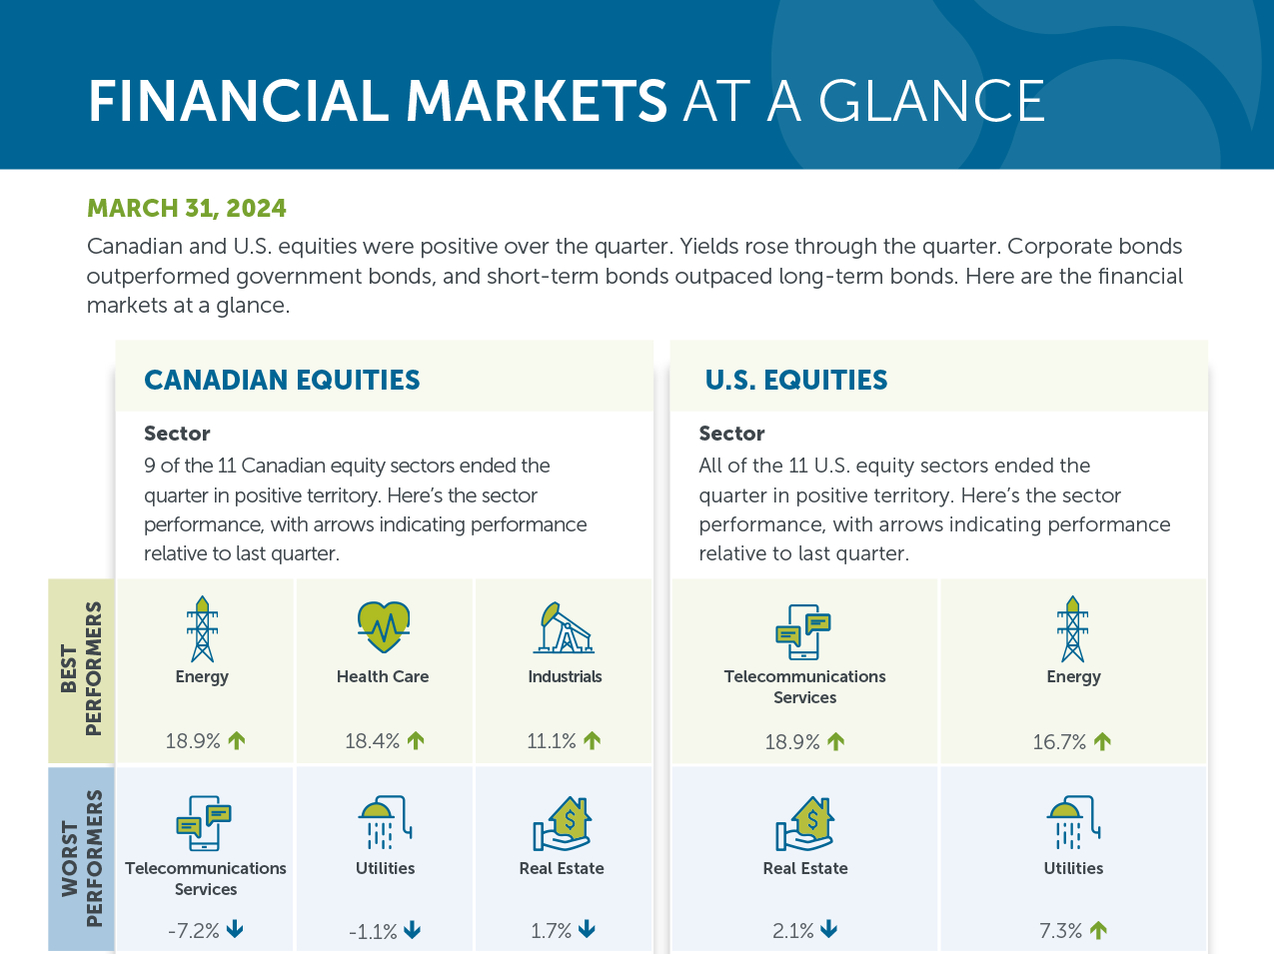 Financial markets at a glance - March 31, 2024